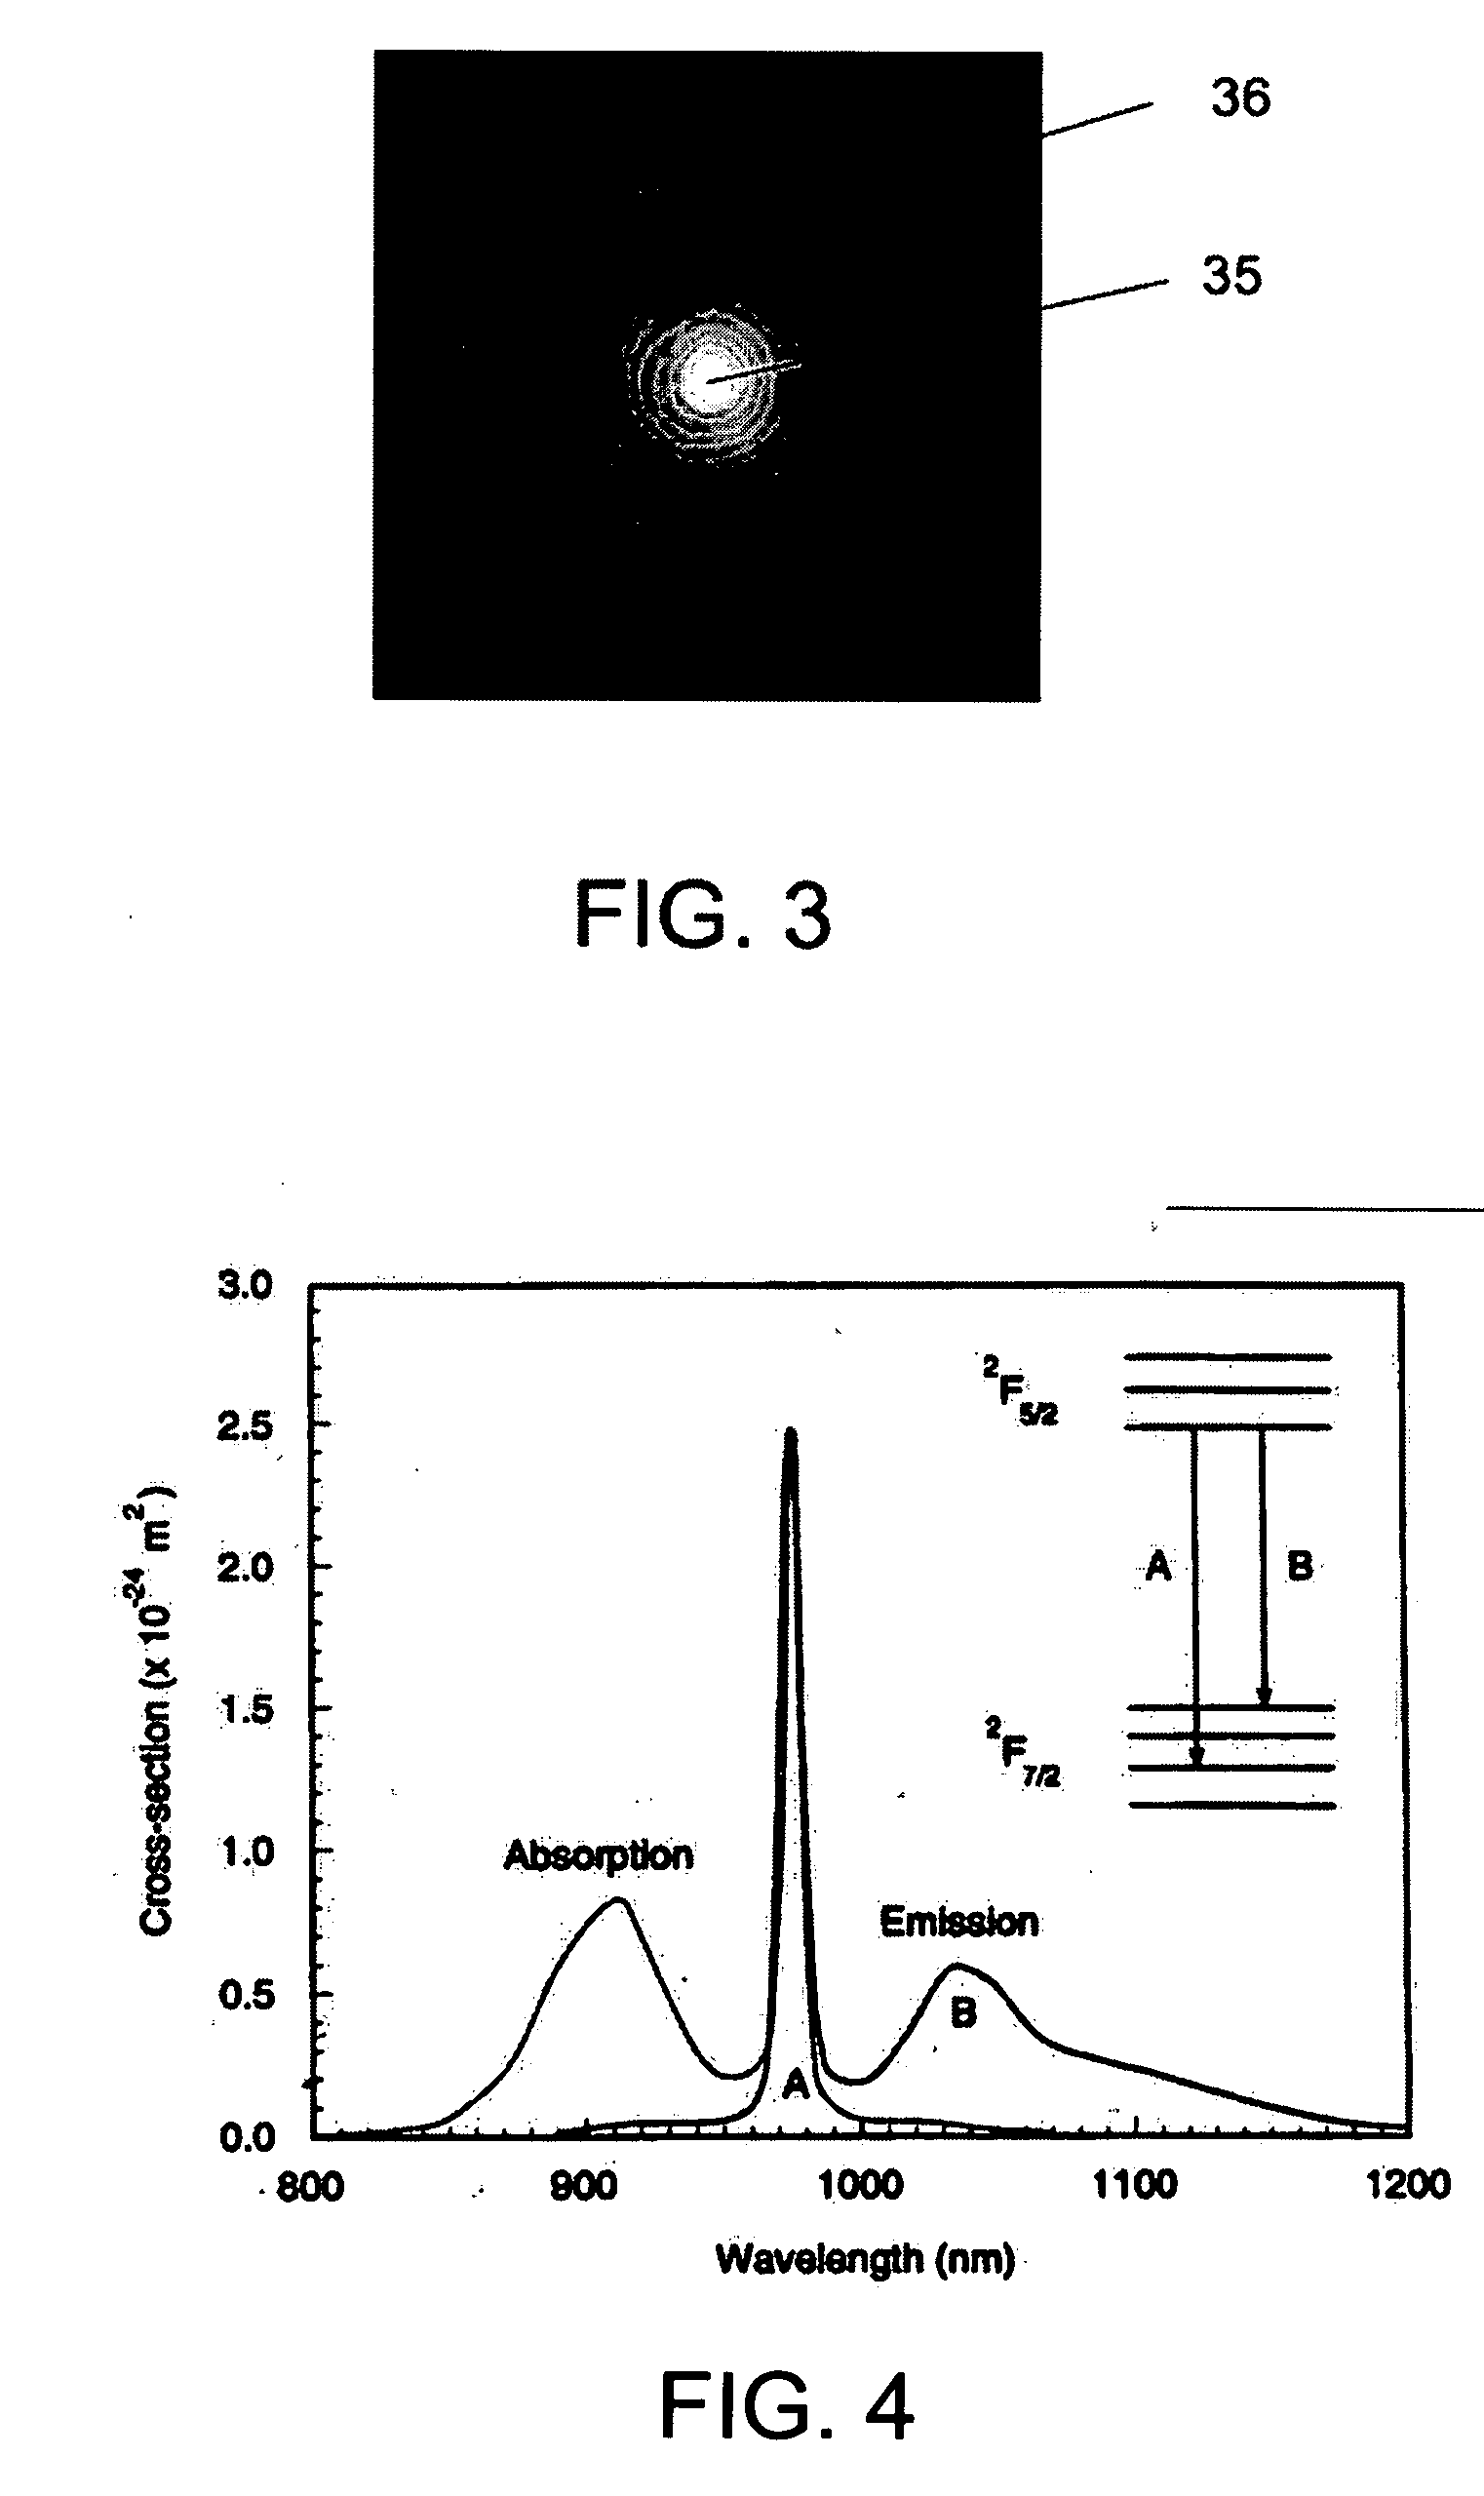 Active Optical Fibers With Wavelength-Selective Filtering Mechanism, Method of Production and Their Use